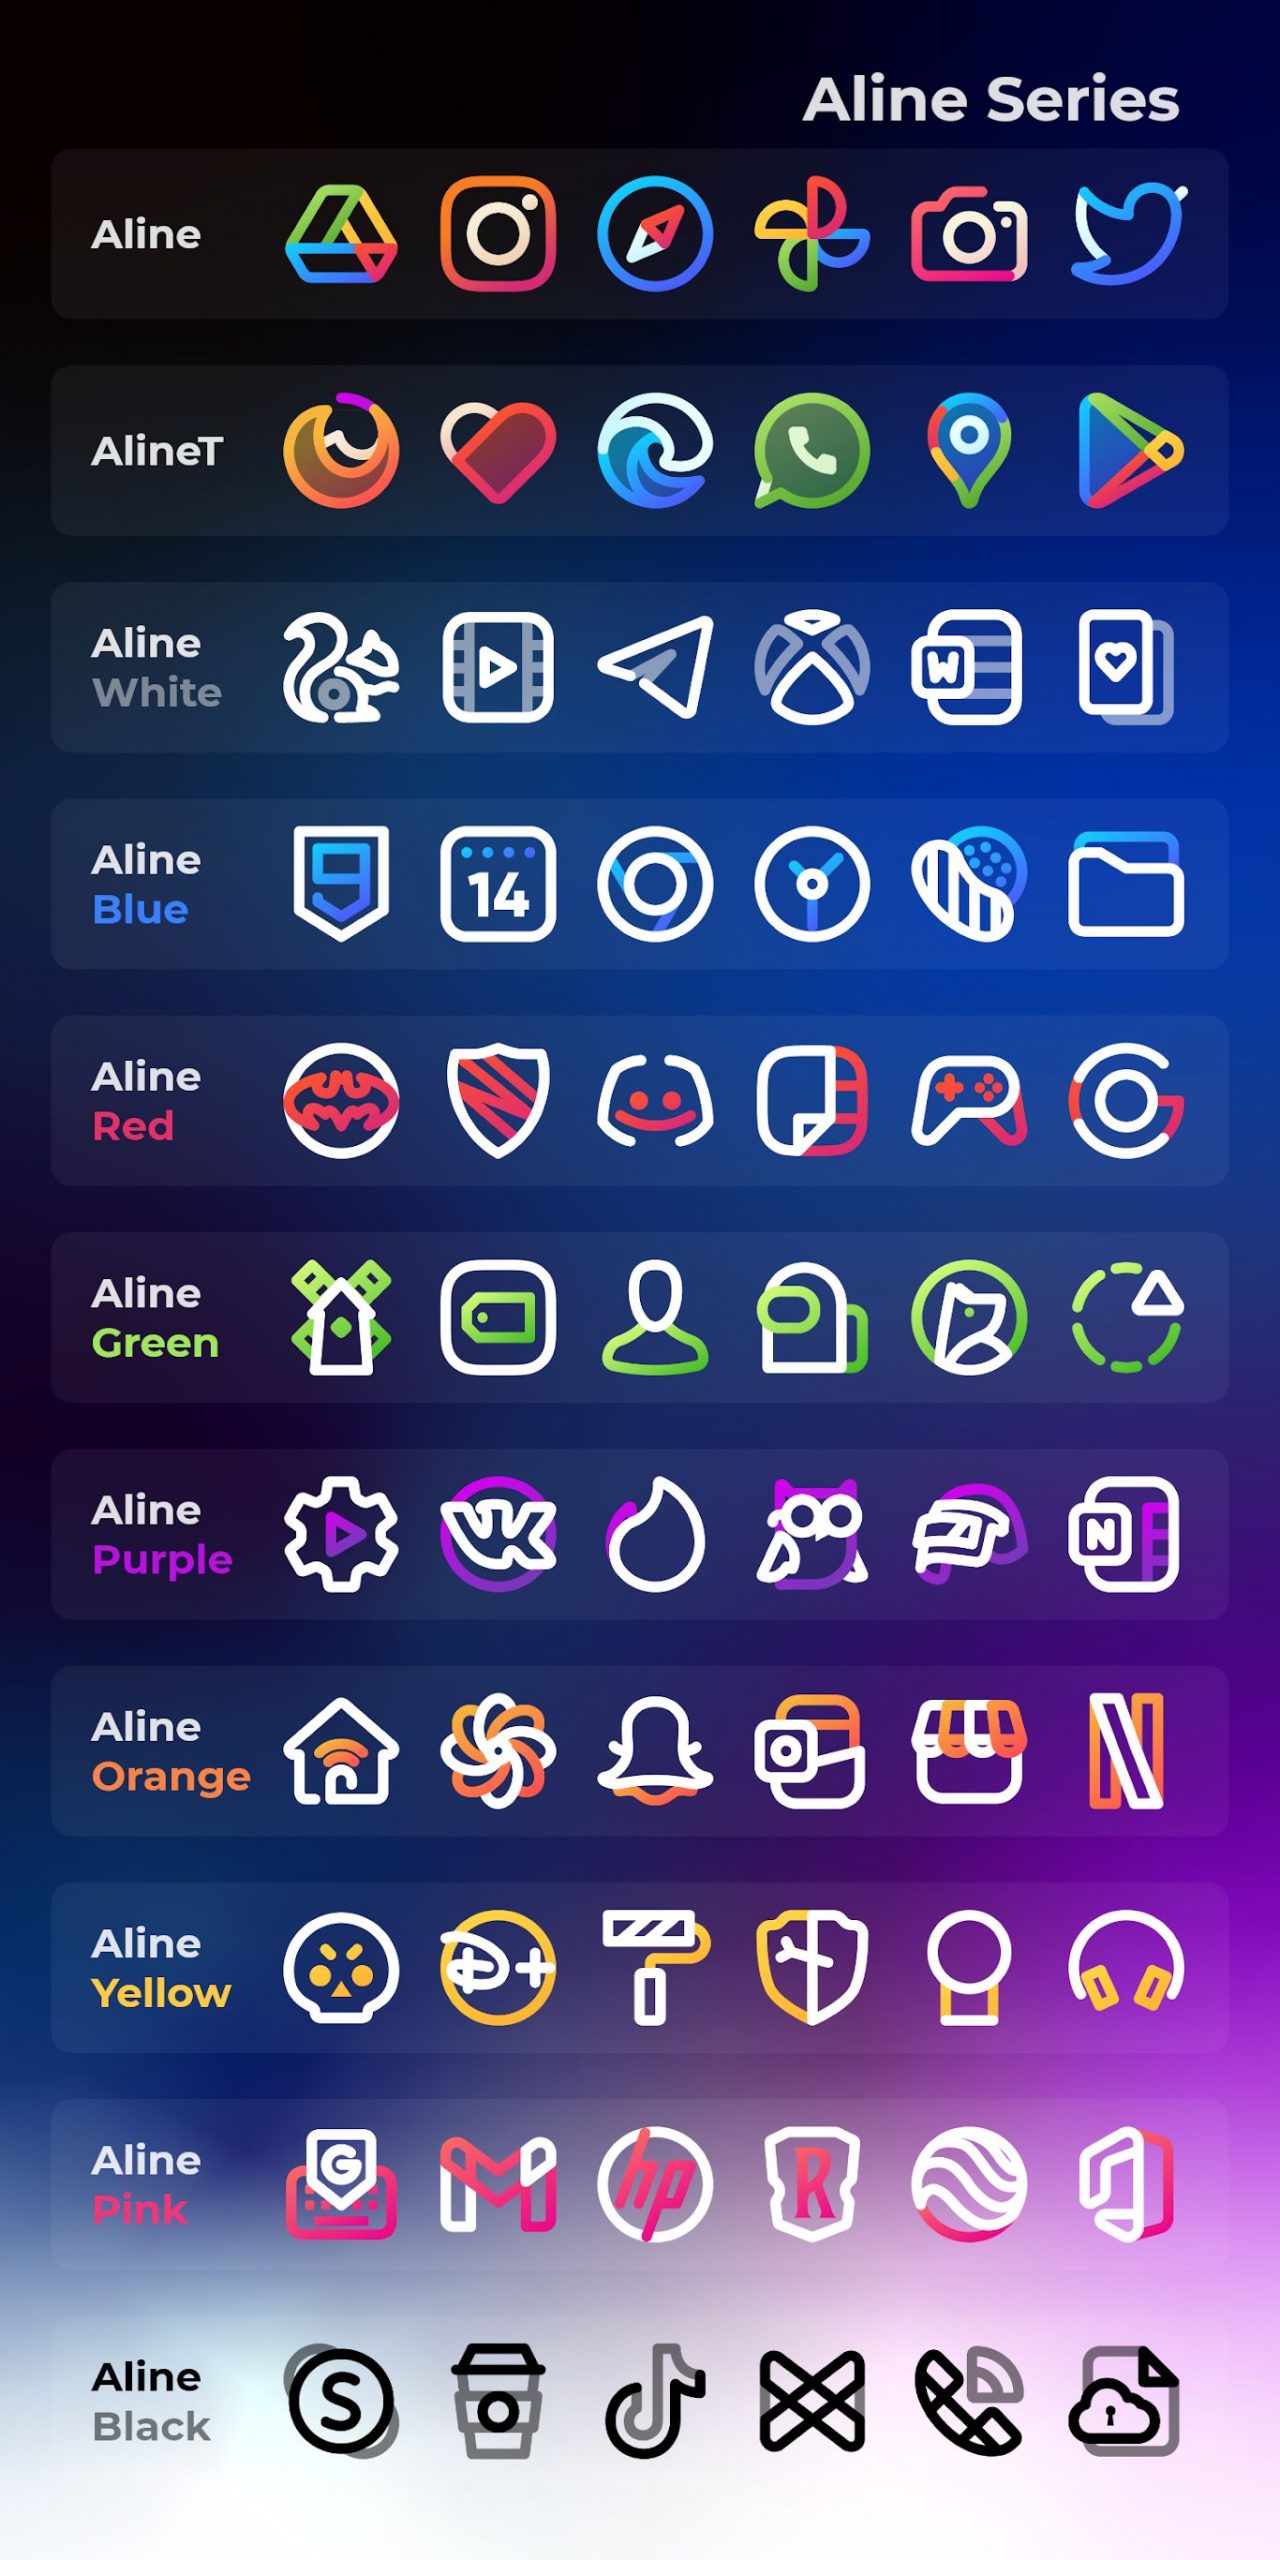 Aline-Red-Icon-Pack.6-scaled.jpg